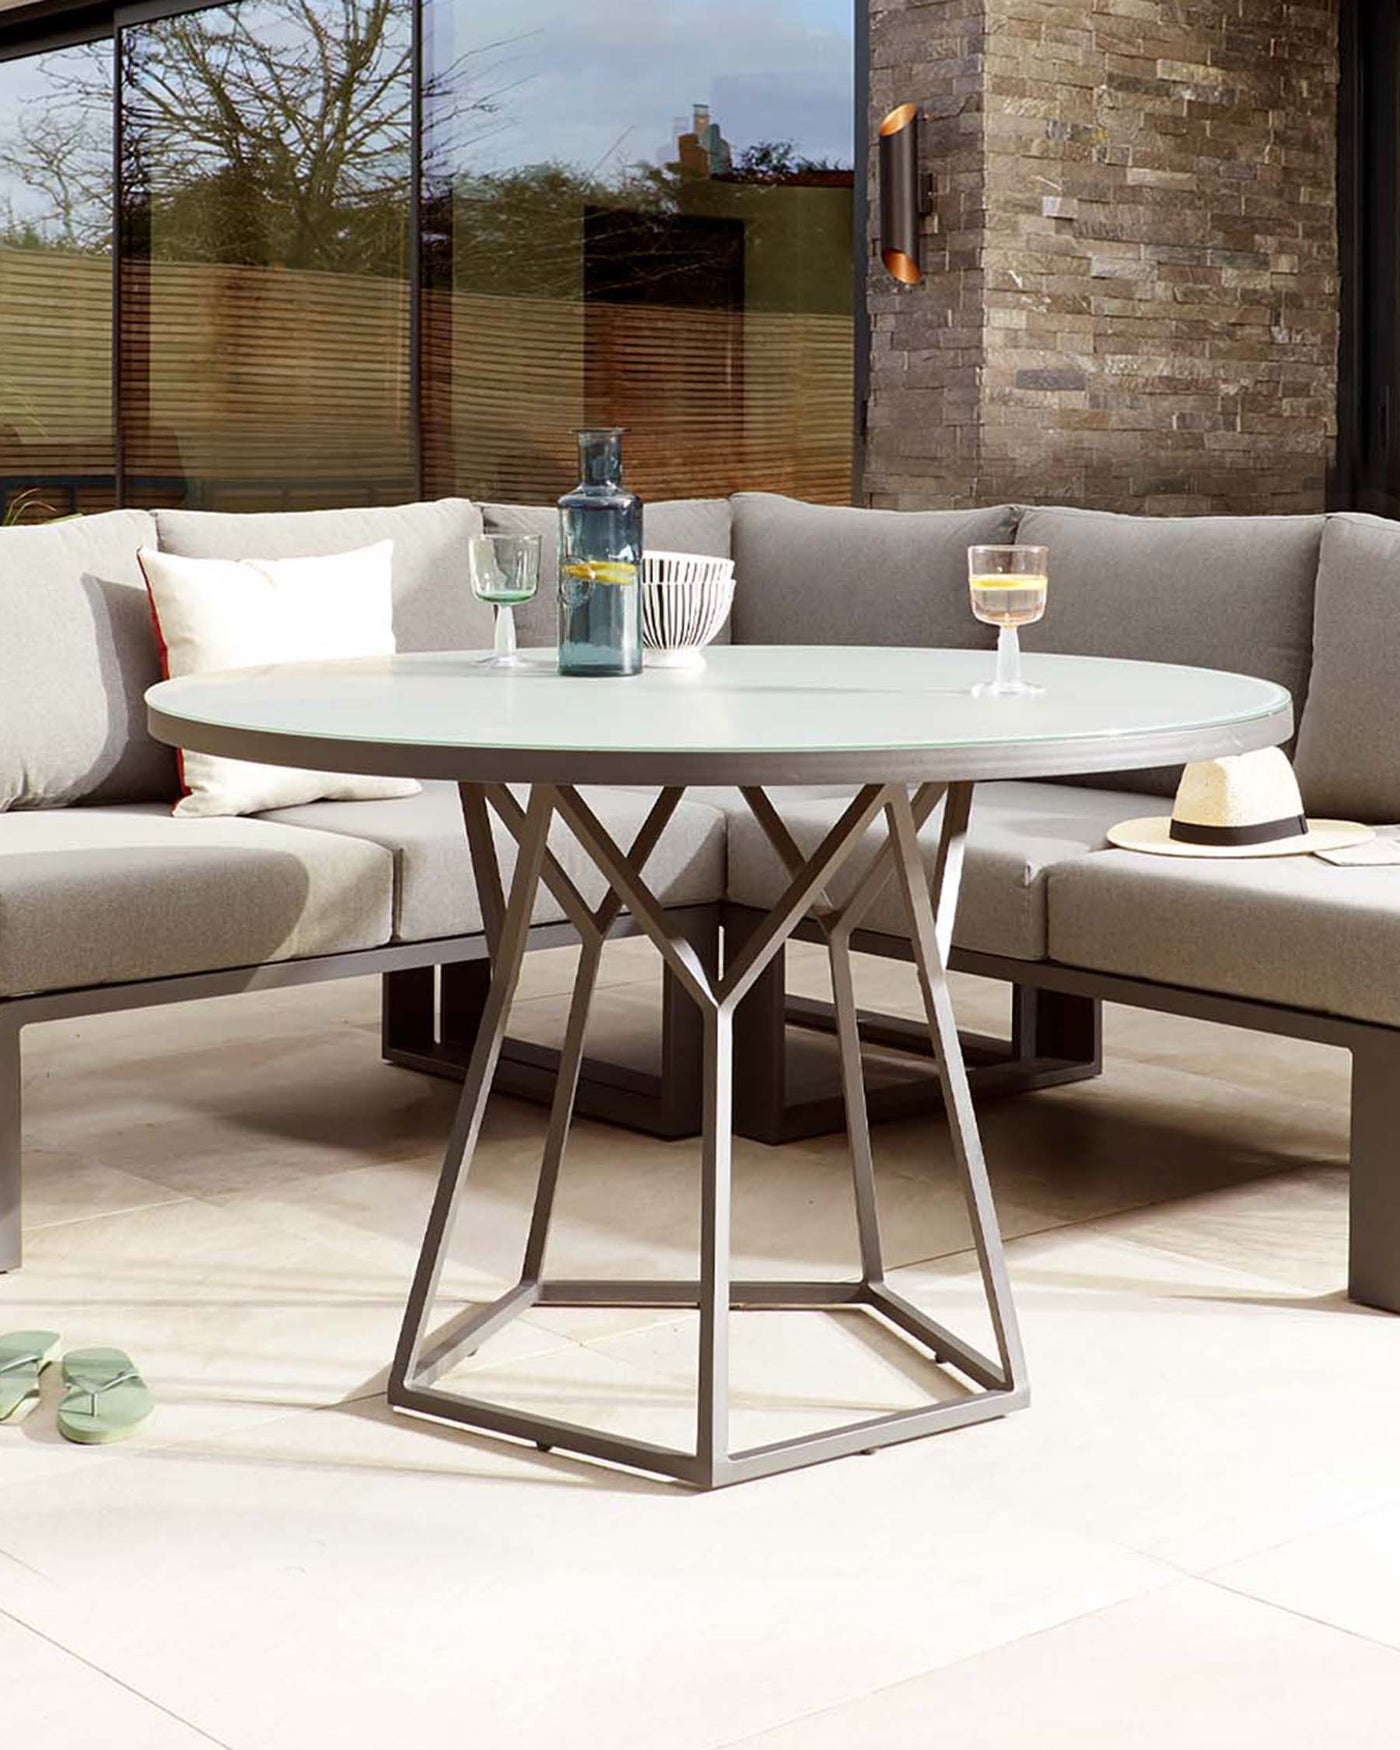 A modern outdoor round table with a frosted glass top and a geometric metallic base in a pentagonal prism shape, paired with a matching sectional outdoor sofa with light grey cushions.